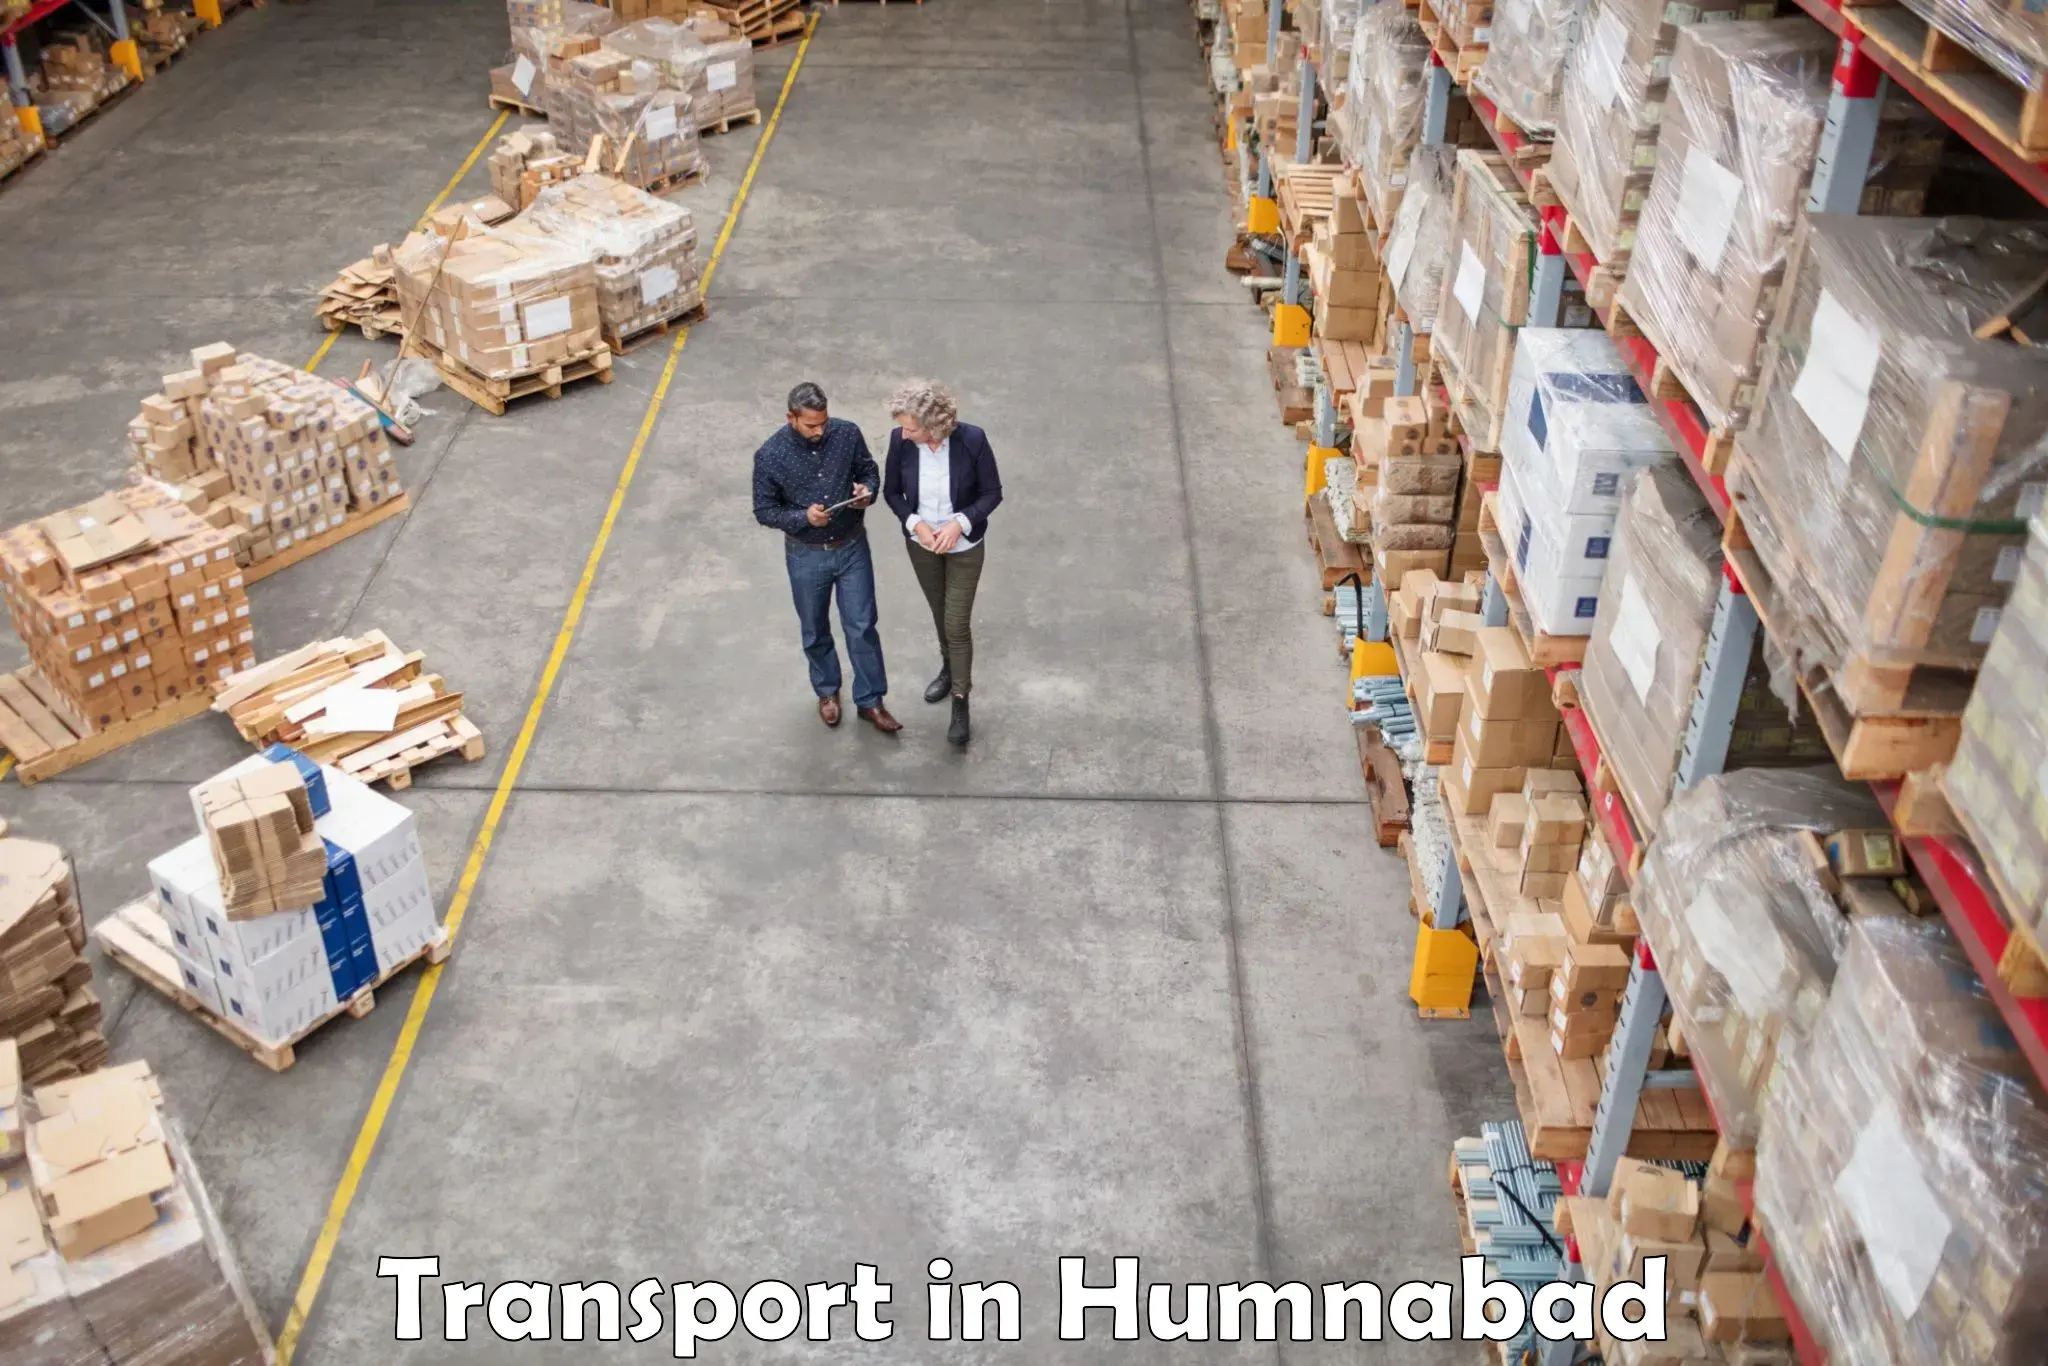 Truck transport companies in India in Humnabad